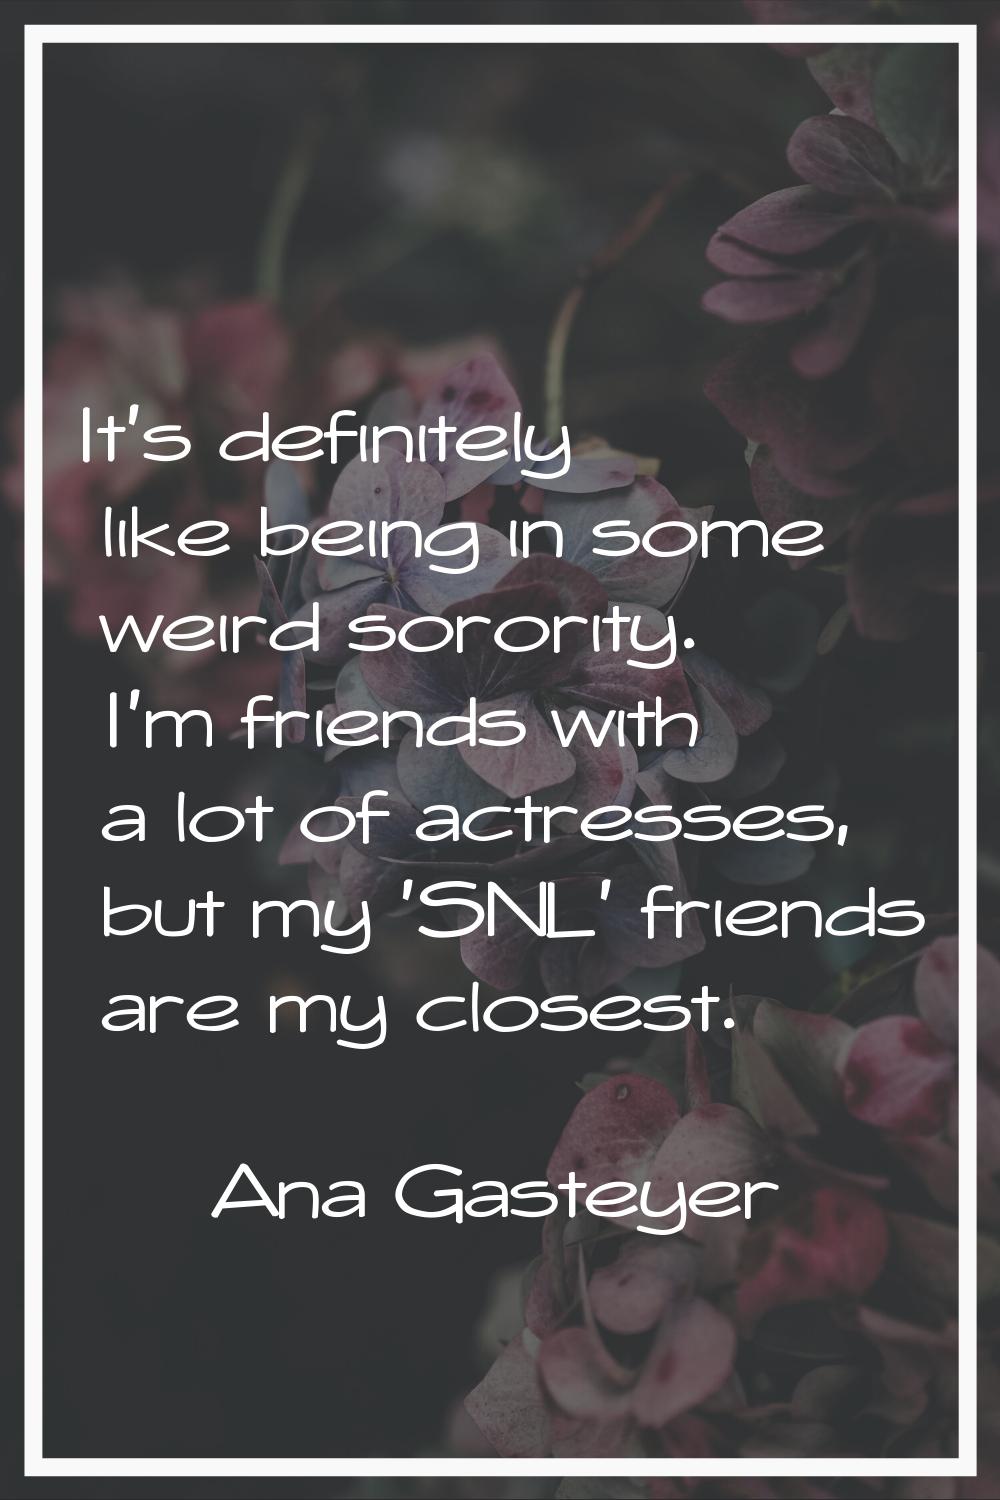 It's definitely like being in some weird sorority. I'm friends with a lot of actresses, but my 'SNL